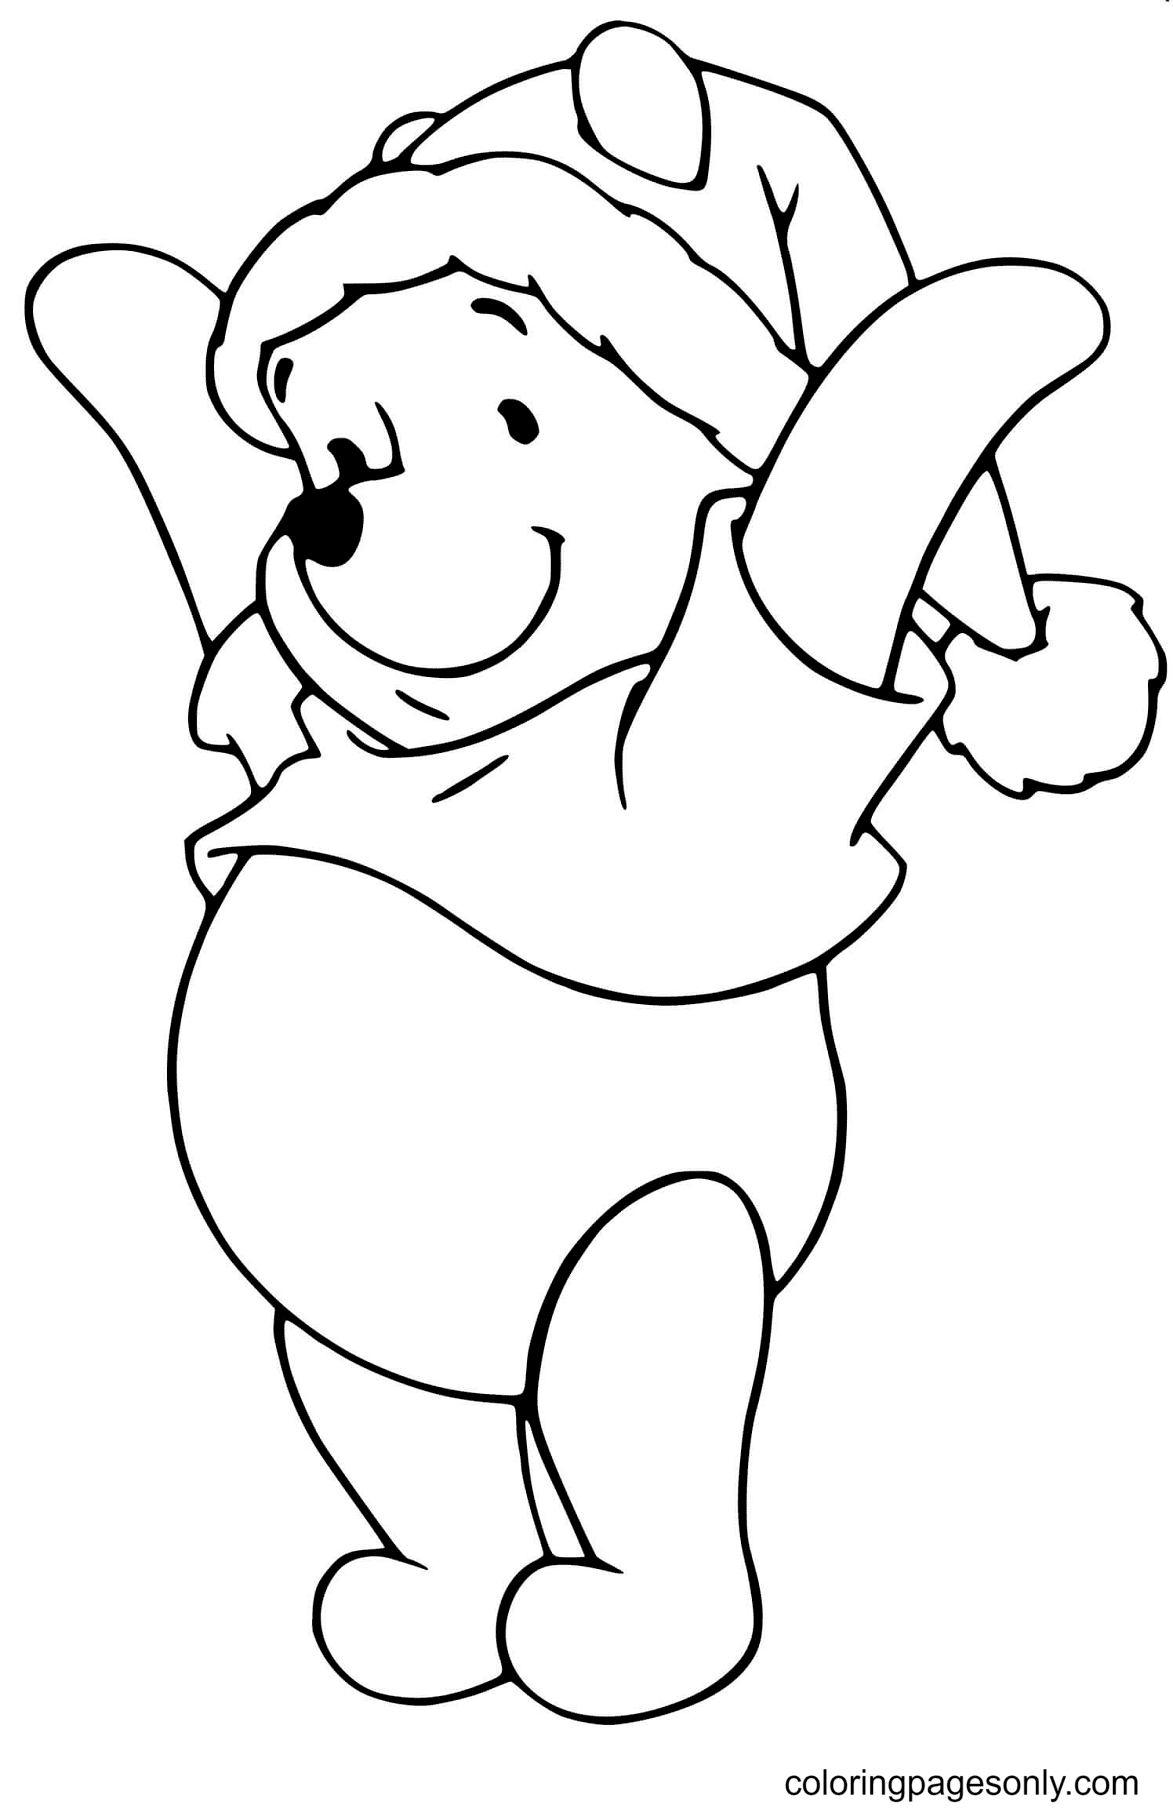 Winnie the Pooh as Santa Claus Coloring Pages